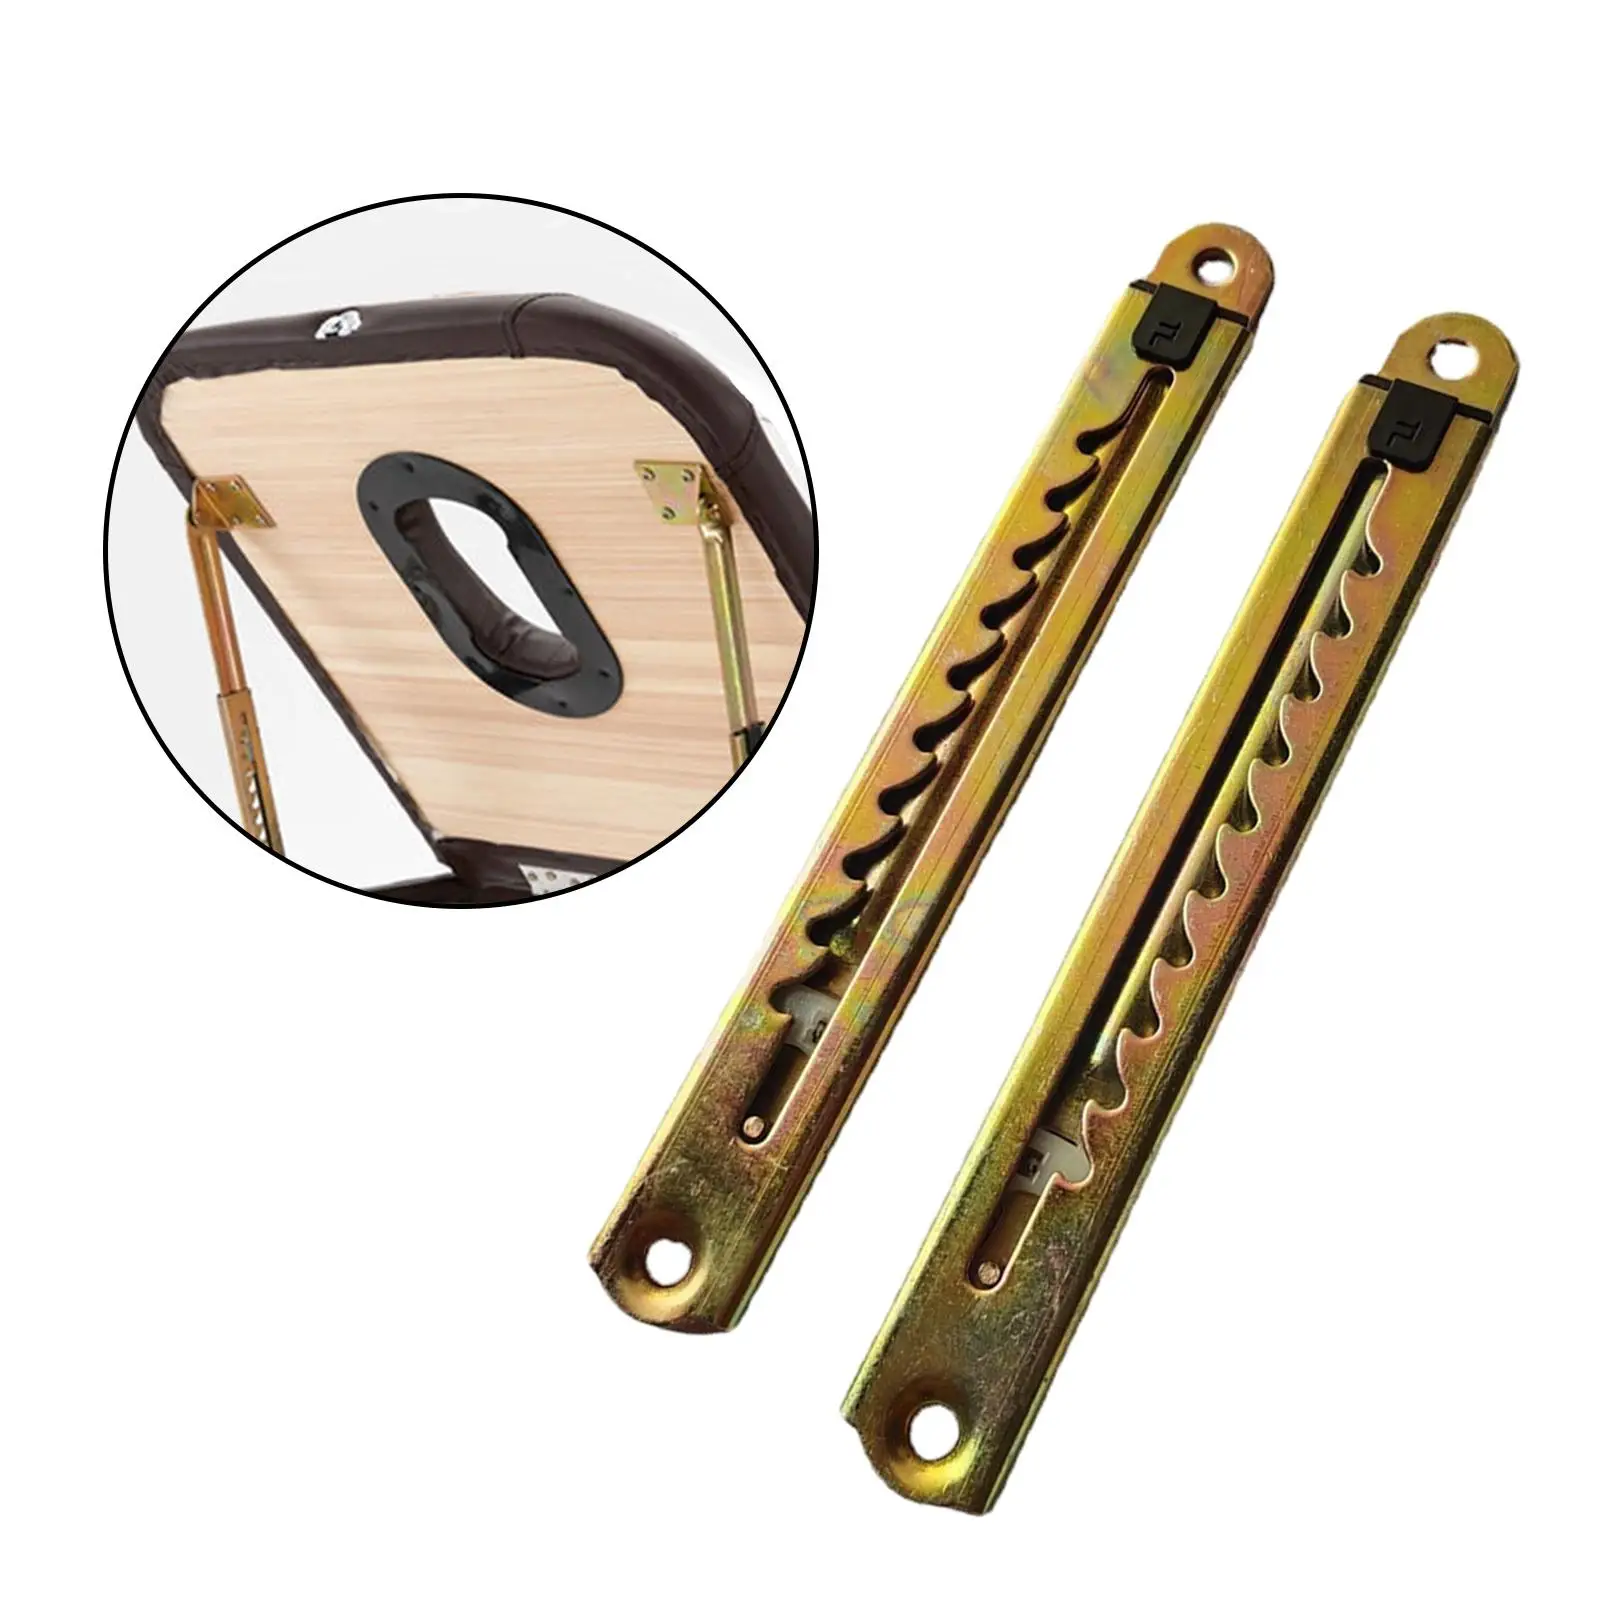 2 Pieces Lift Support Lifting Device Hardware Tools for Bed Door Furniture